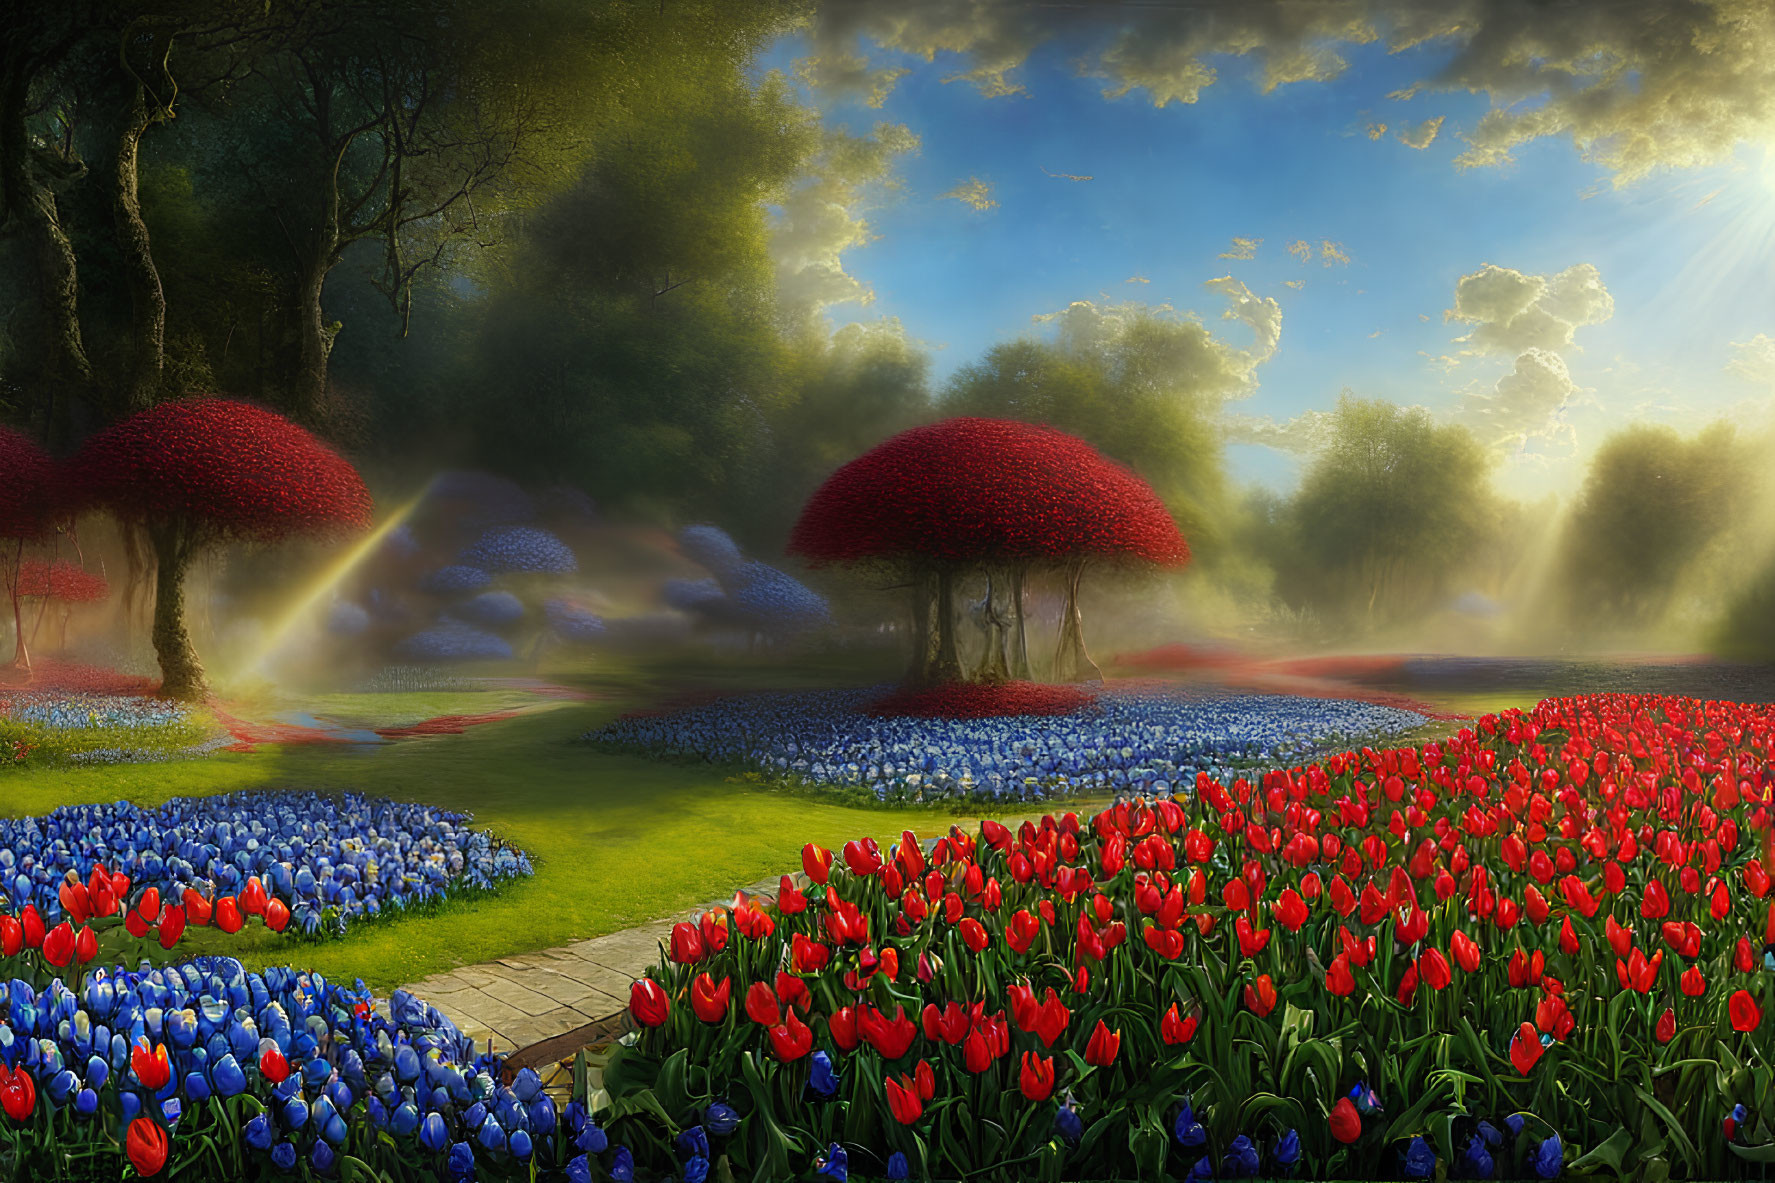 Fantasy garden with oversized red-capped mushrooms and colorful tulips.